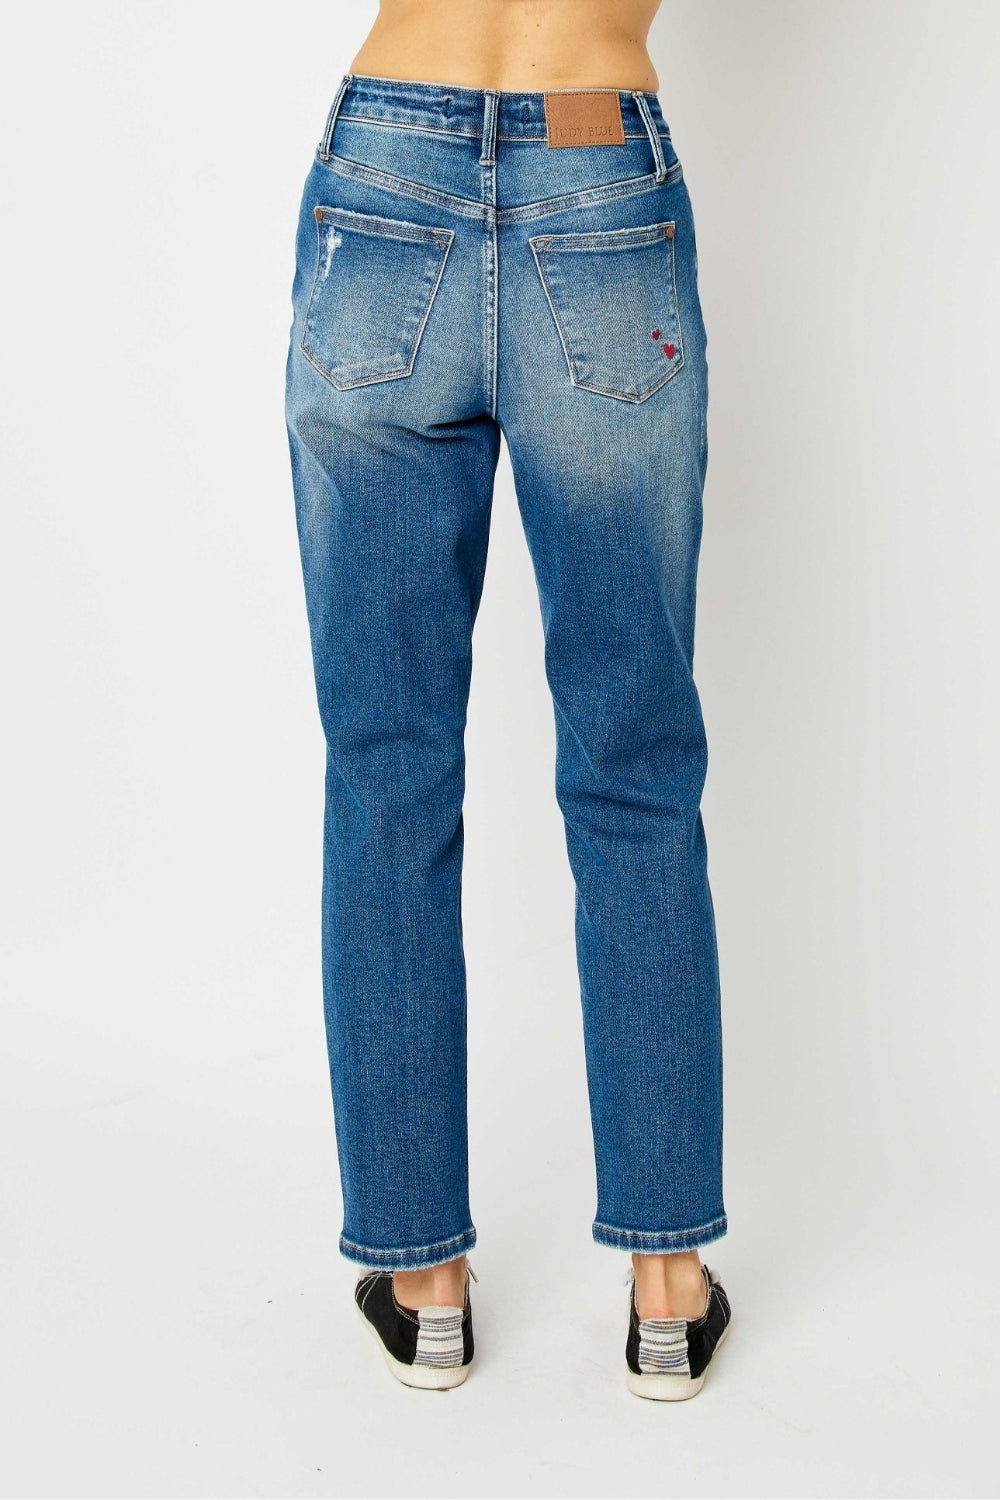 Queen of Hearts Distressed Boyfriend Fit Jeans